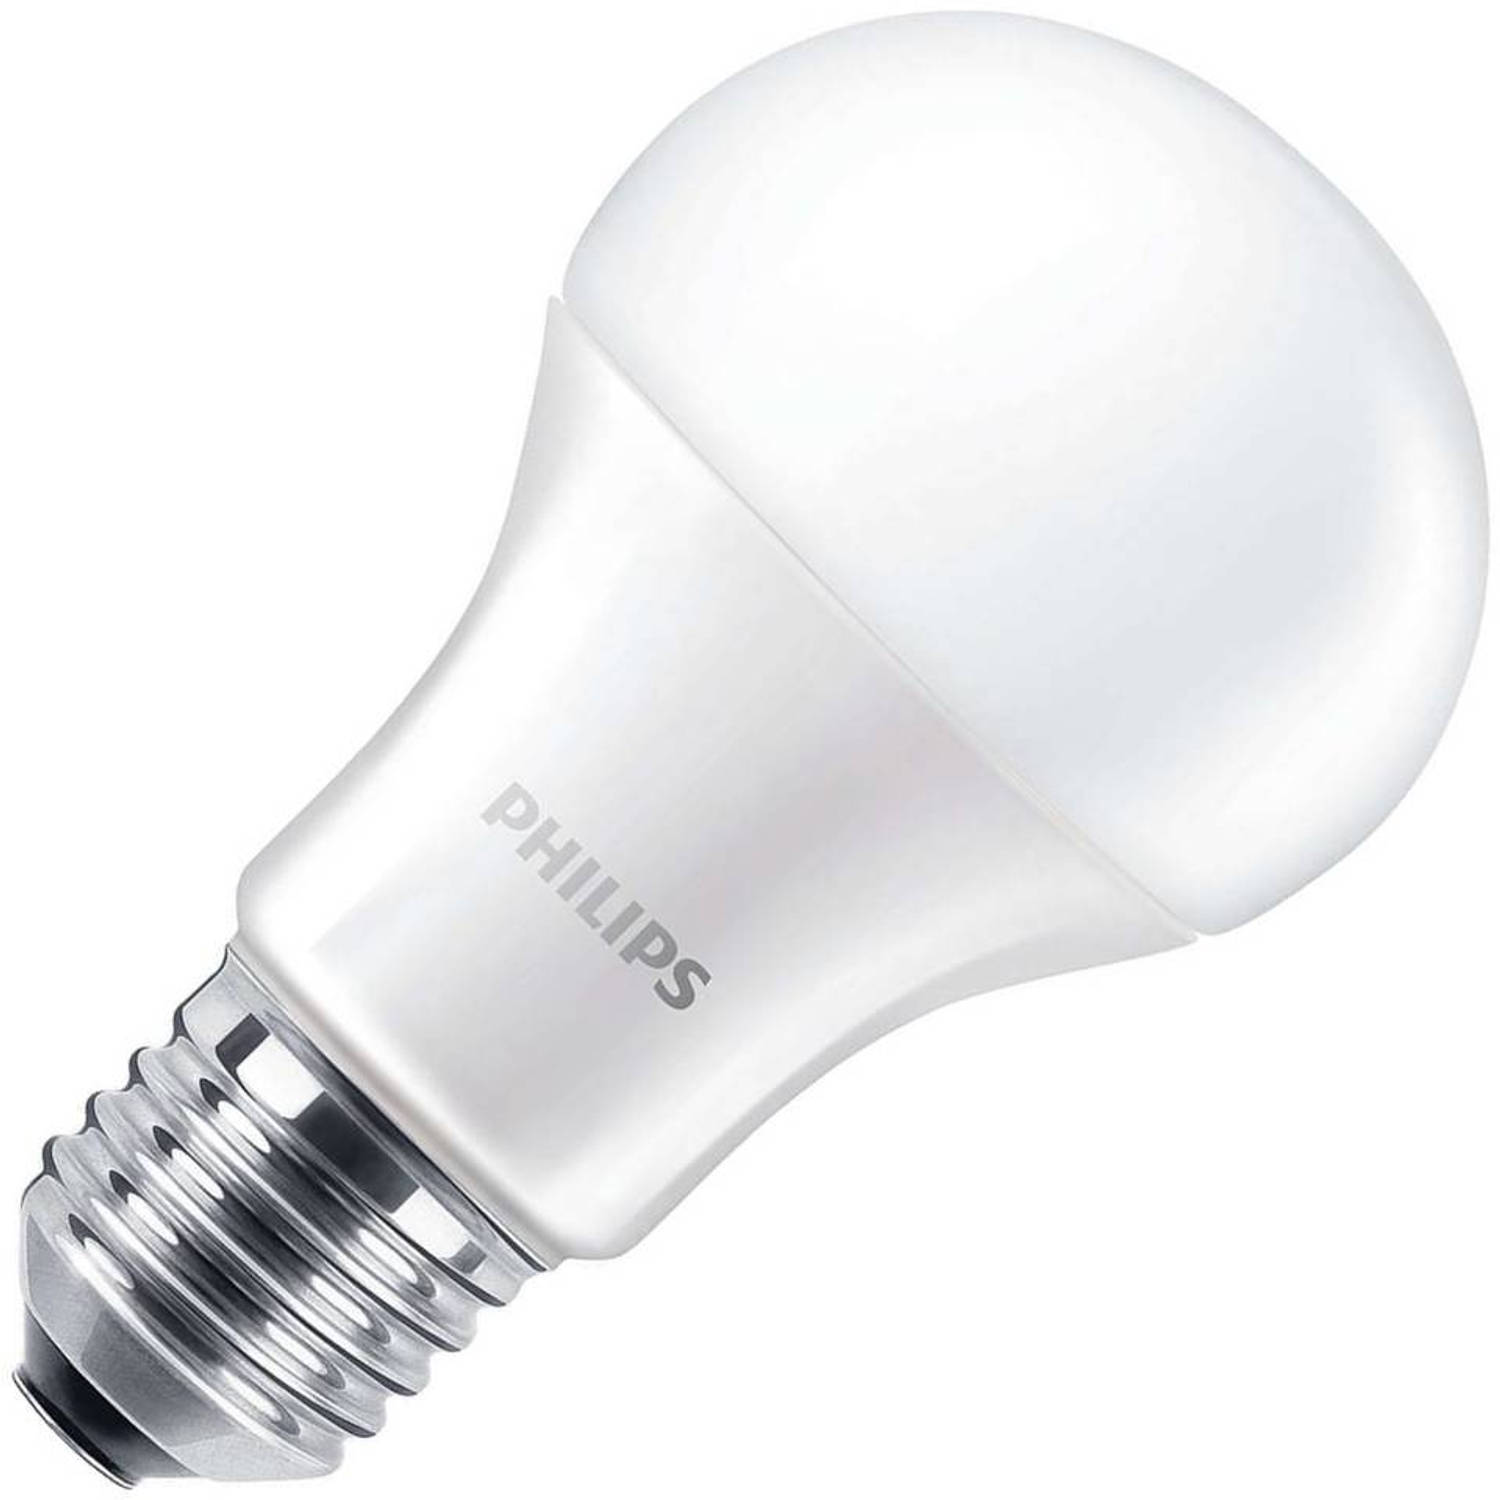 Philips standaardlamp led mat 13w (vervangt 100w) grote fitting grote fitting e27